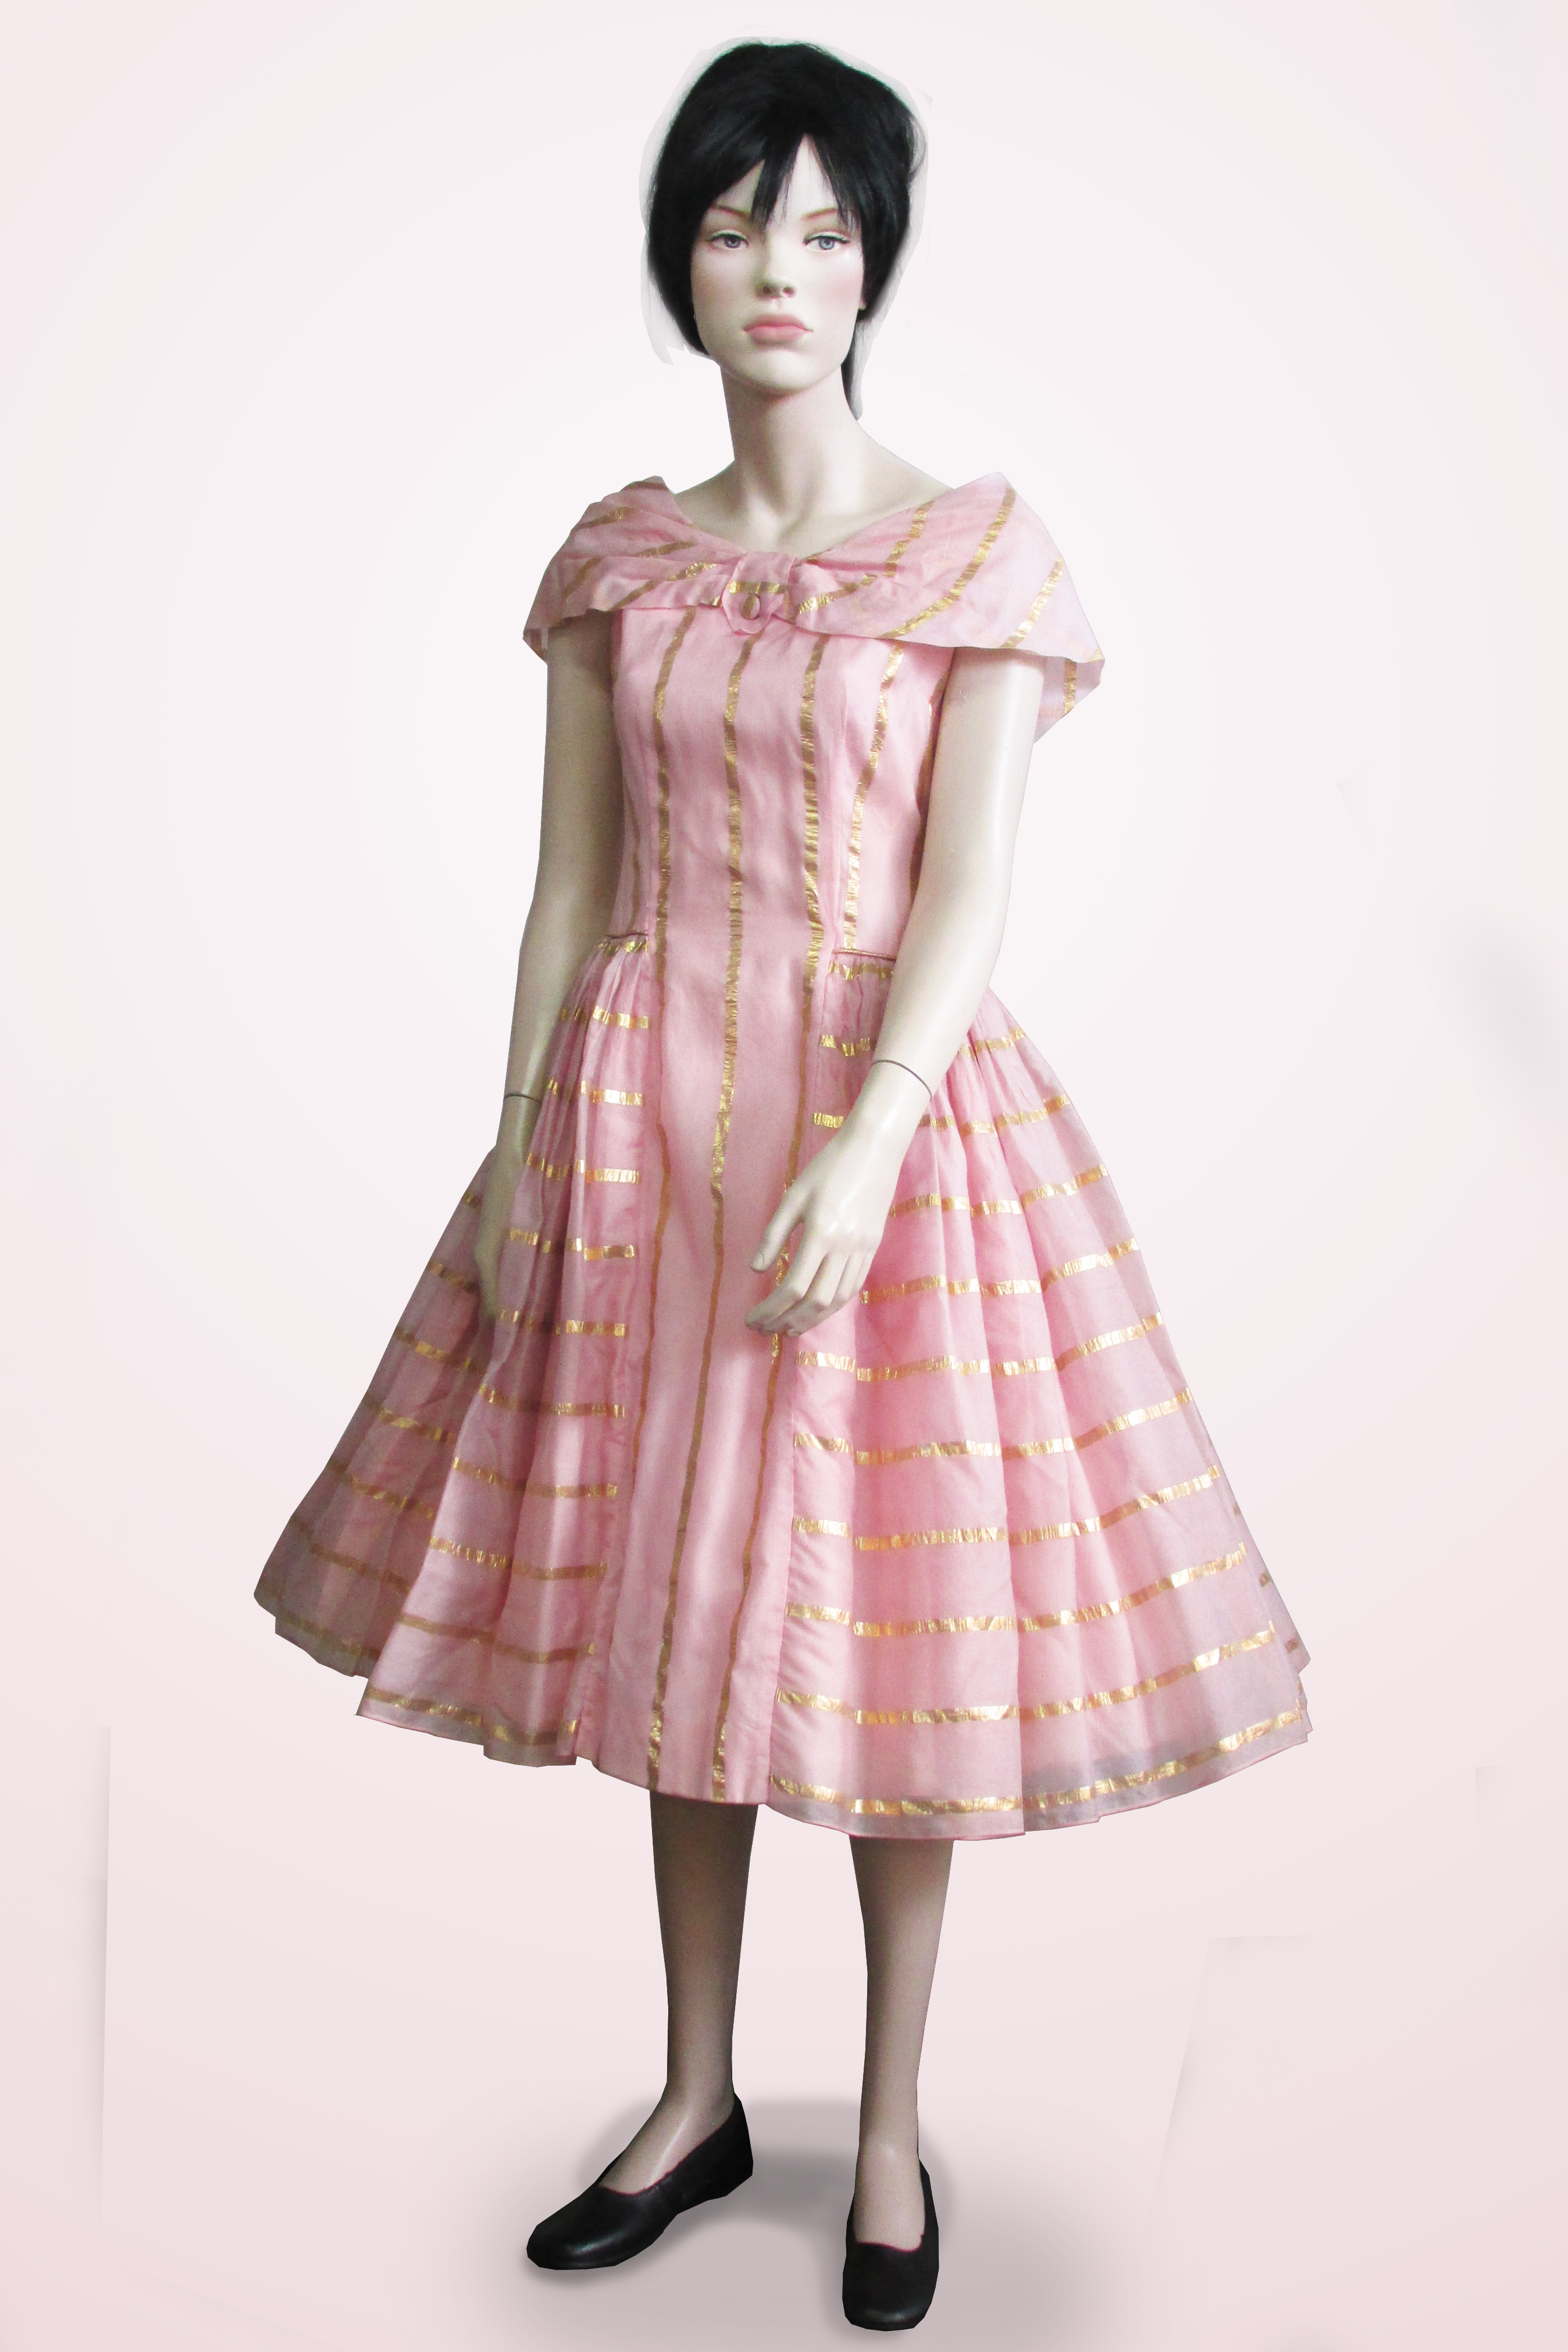 Dress Pink with Gold Stripes 1950s